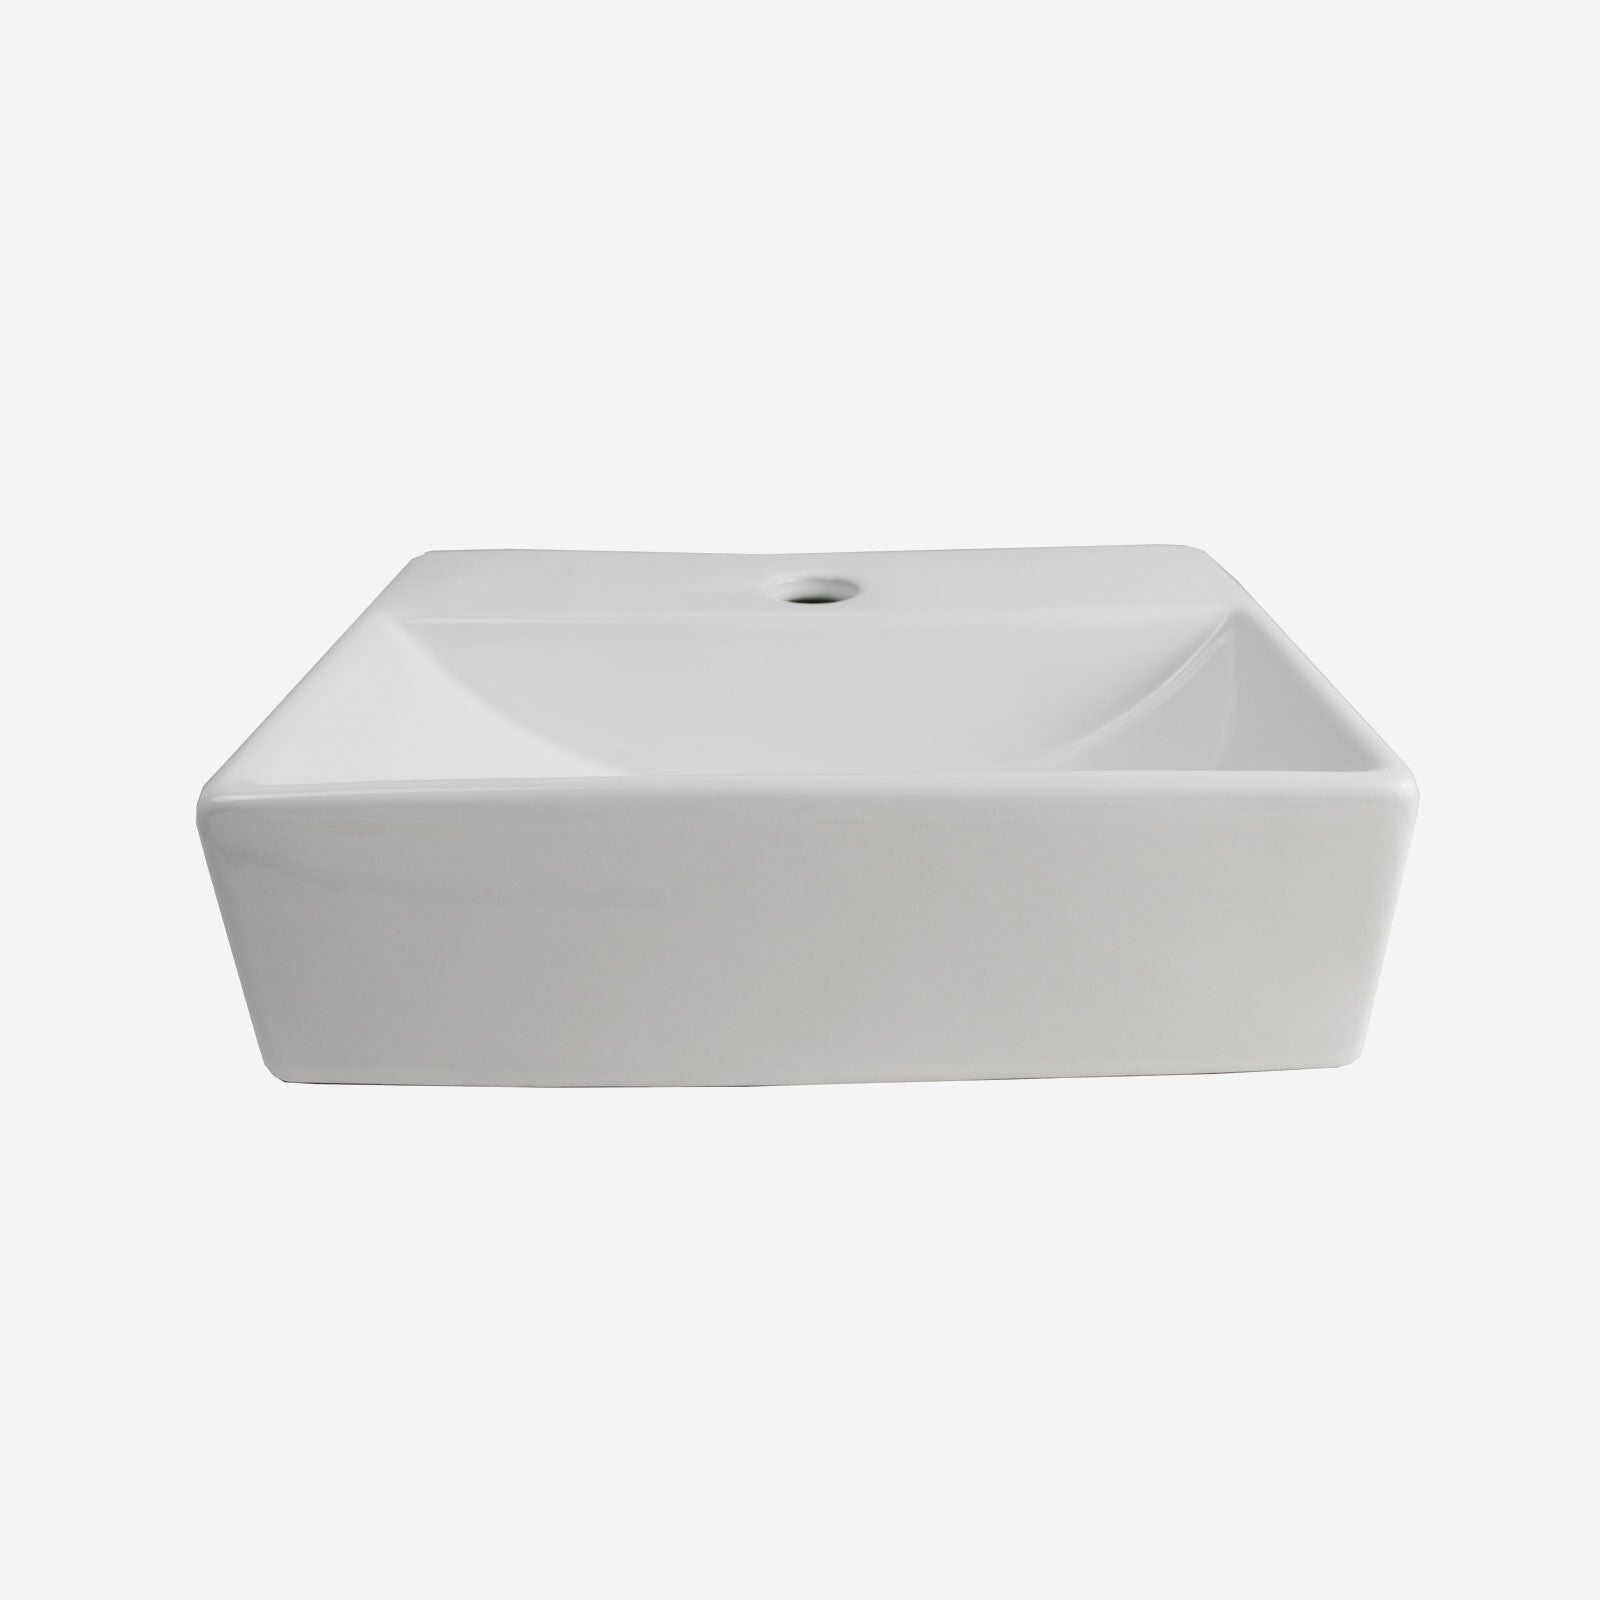 375mm x 110mm Bathroom Peregrine Cloakroom Counter Top or Wall Hung Ceramic Basin Sink and Fittings